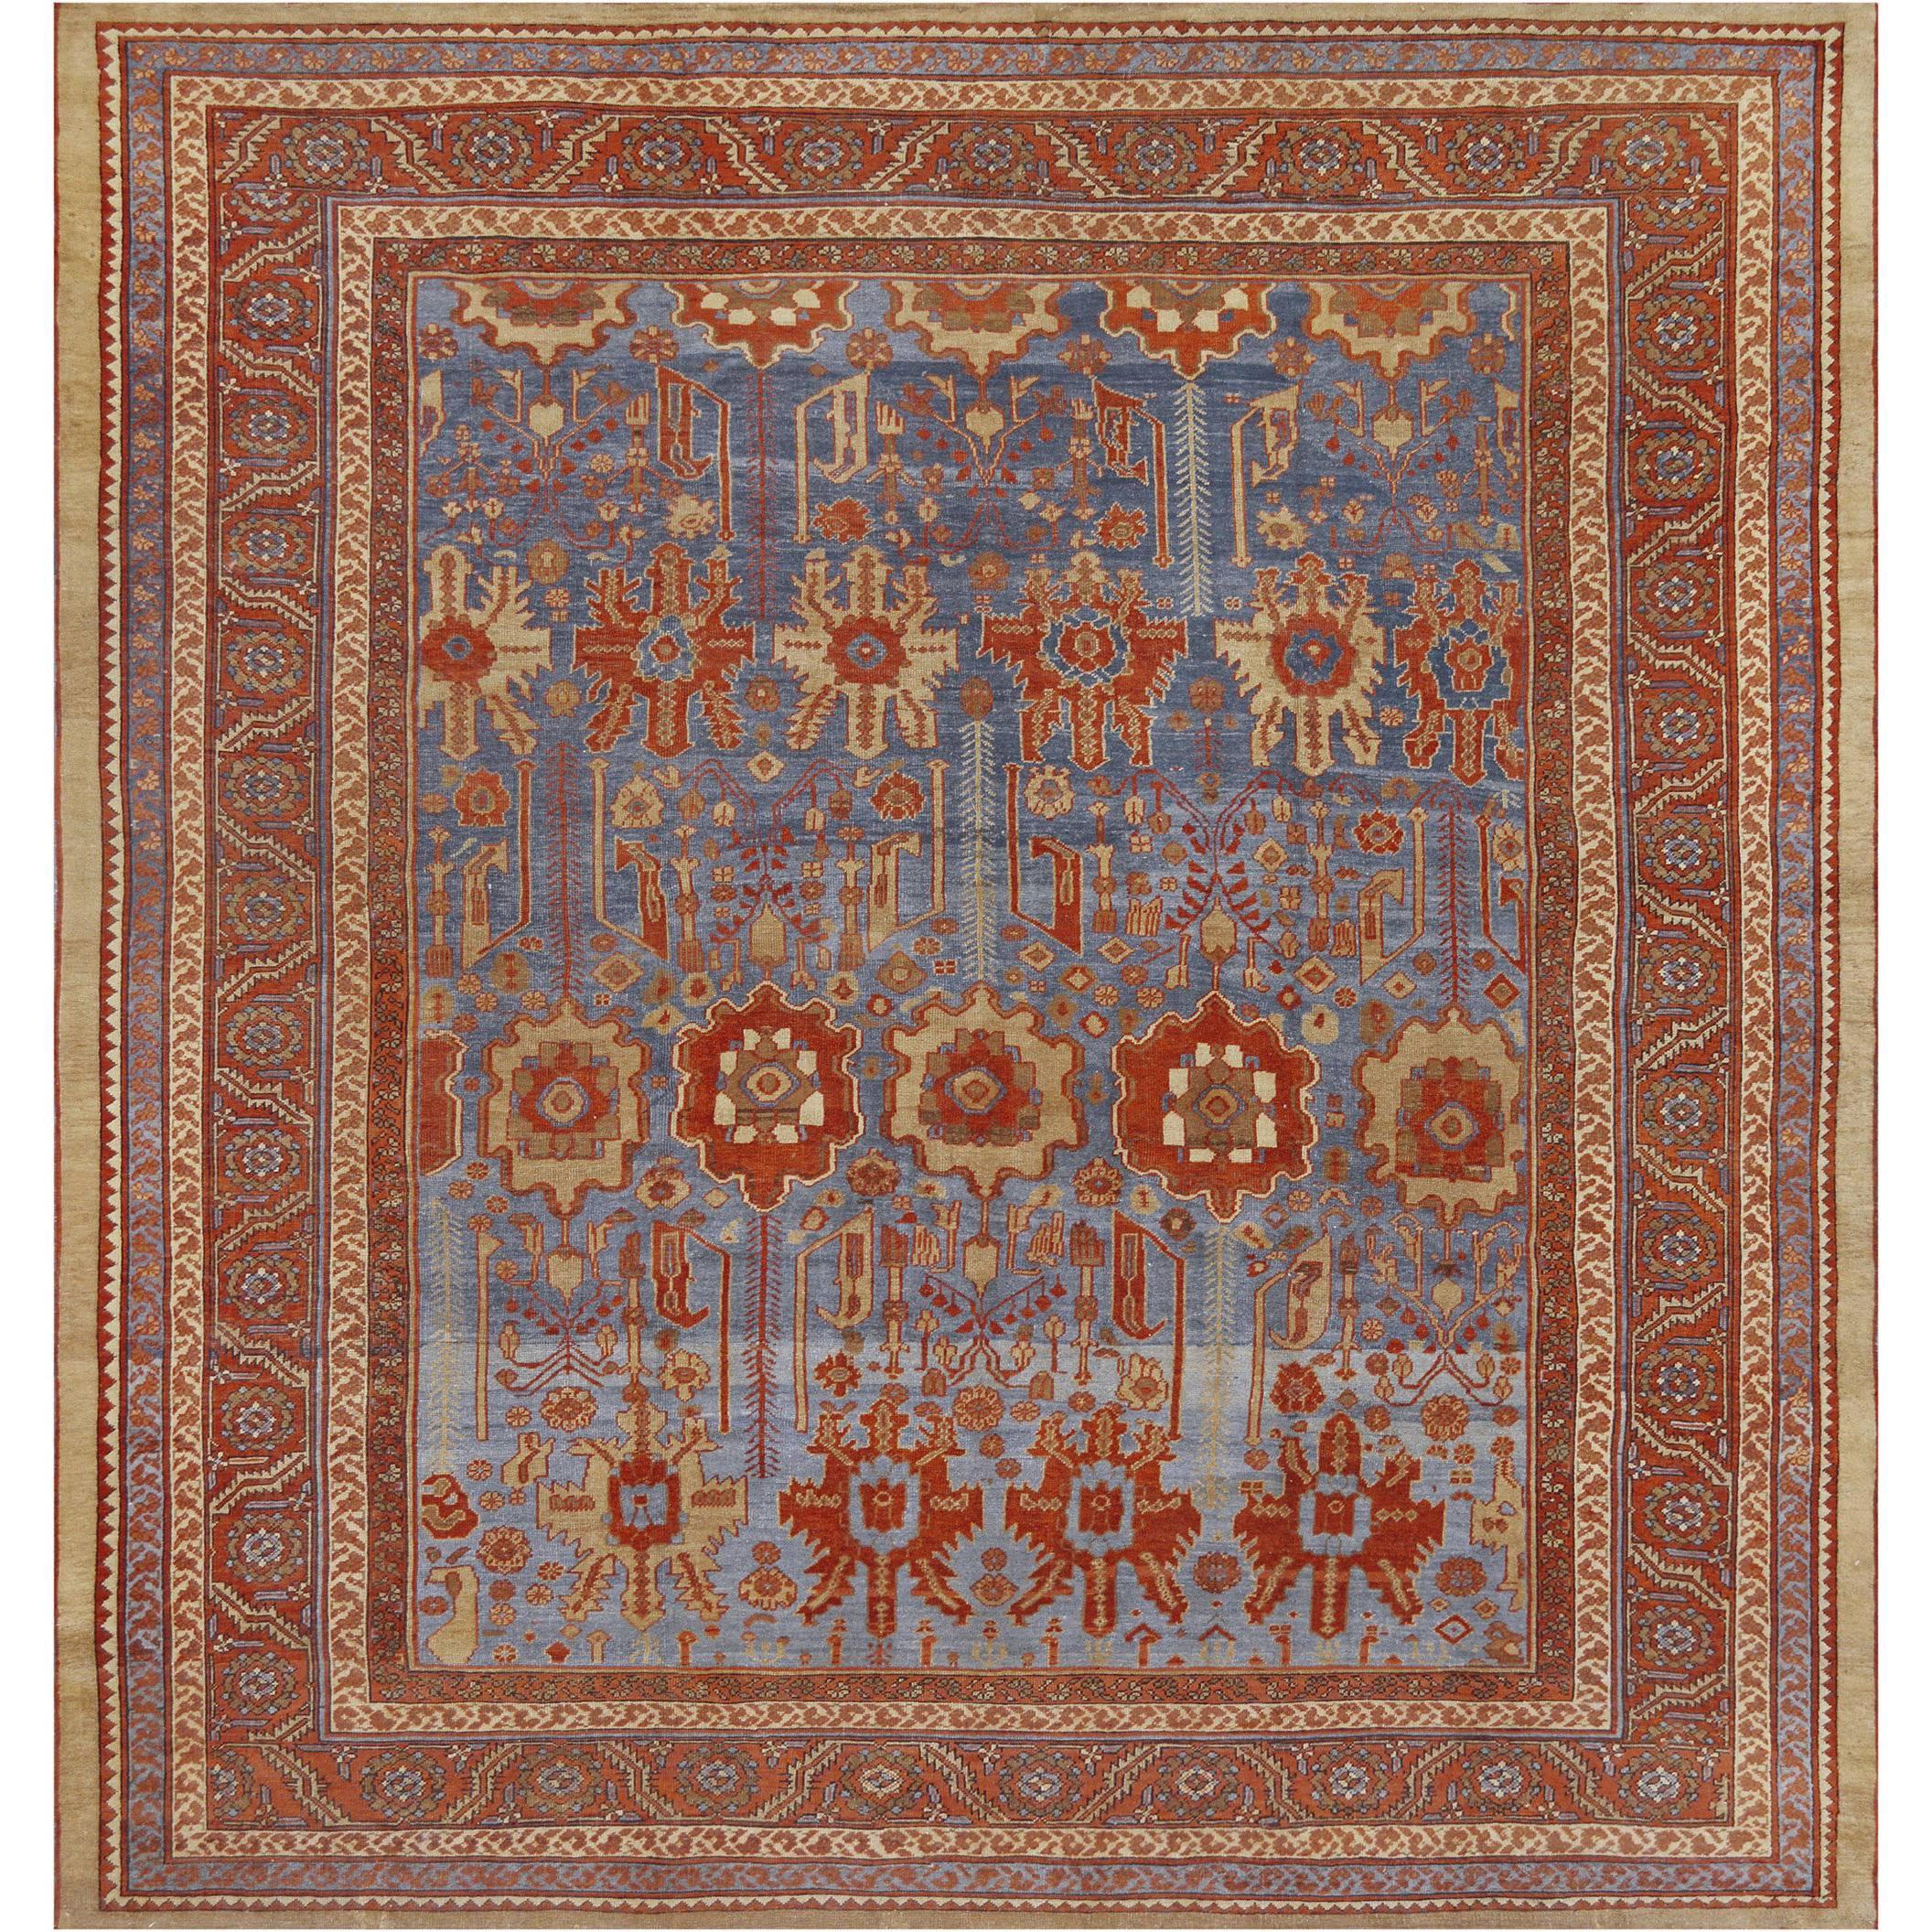 Hand-Woven Late 19th Century Wool Bakhshaish Rug from North West Persia For Sale